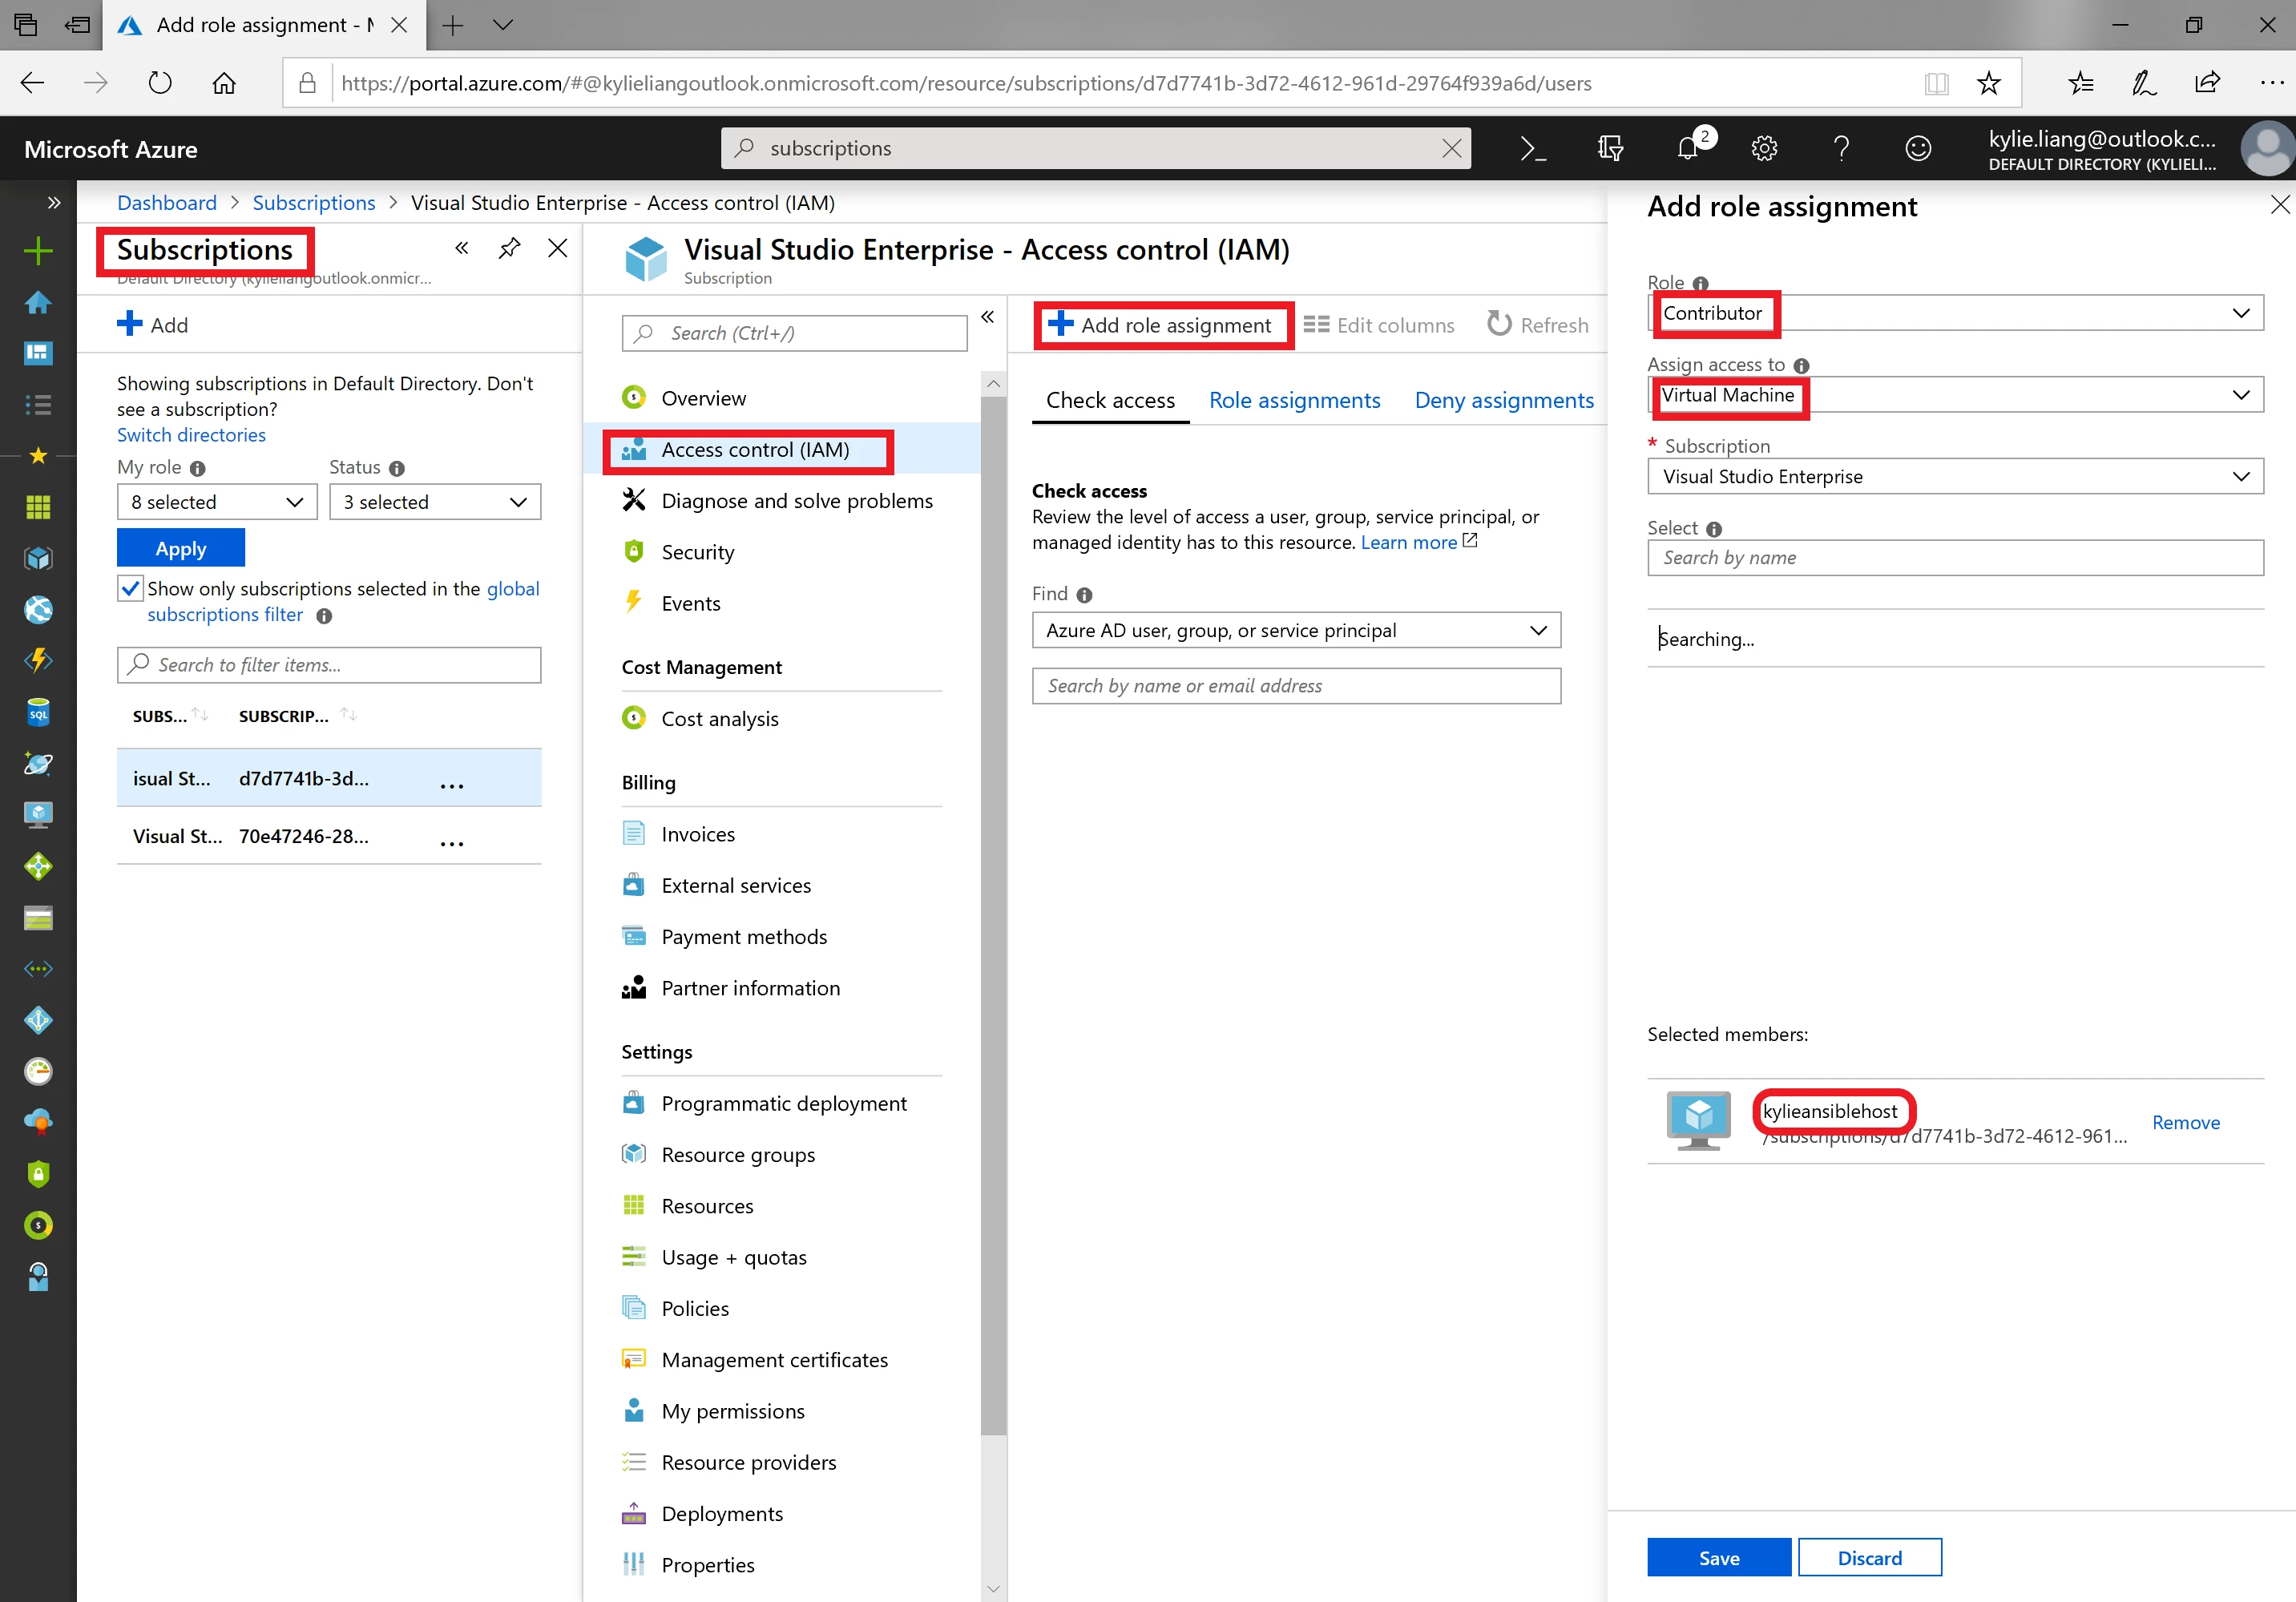 Screenshot of granting virtual machines access to subscriptions in the Azure portal